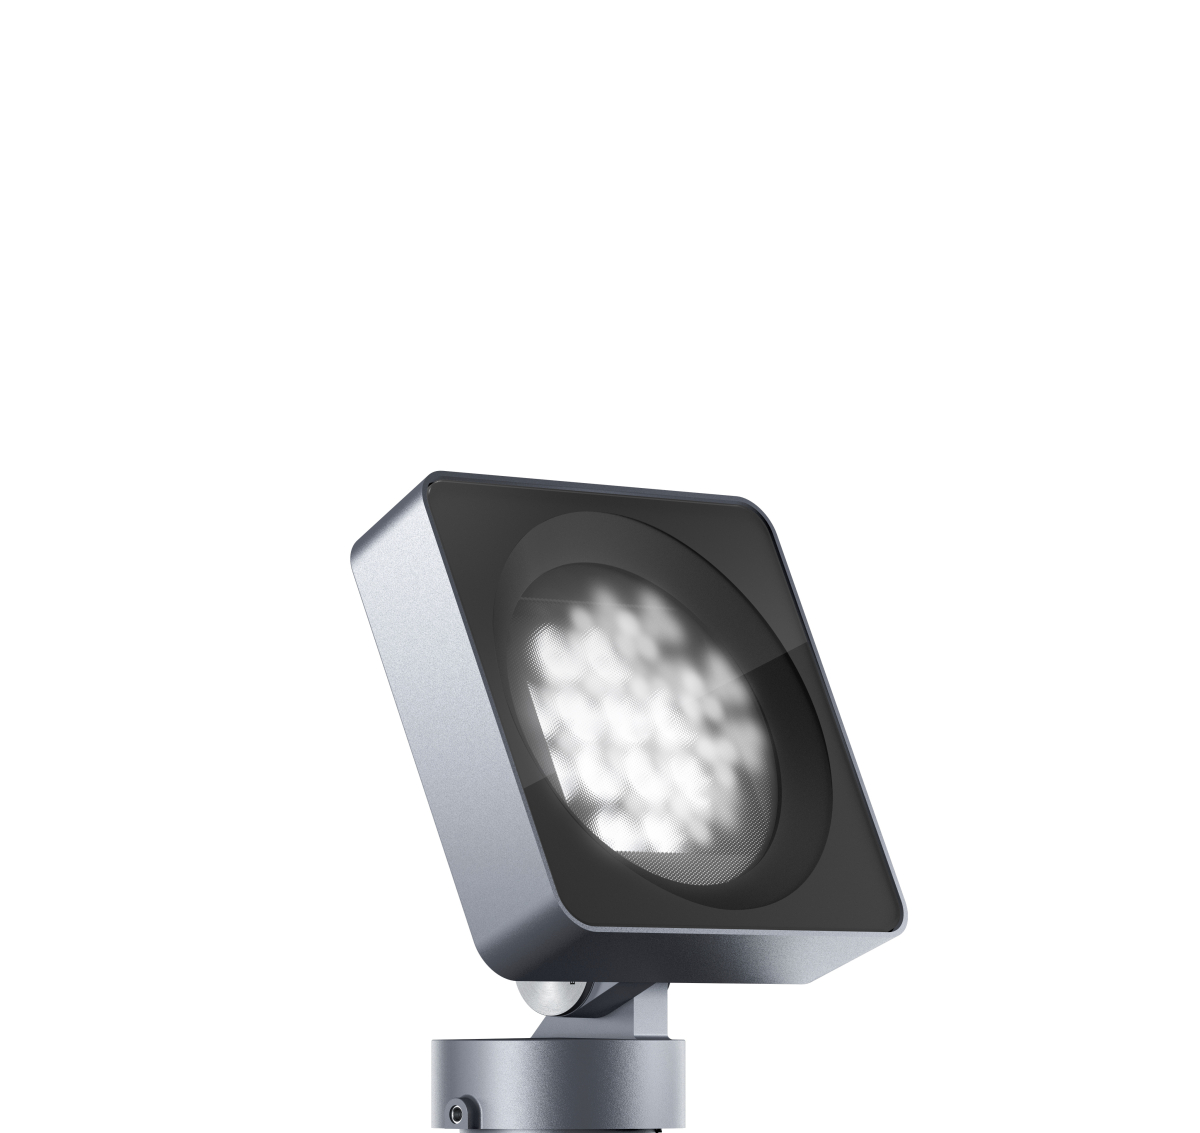 Lightscan IP65 Surf Mtd Floodlight With Mounting Plate Oval Flood Beam 72W LED 3000K DALI Graphit M